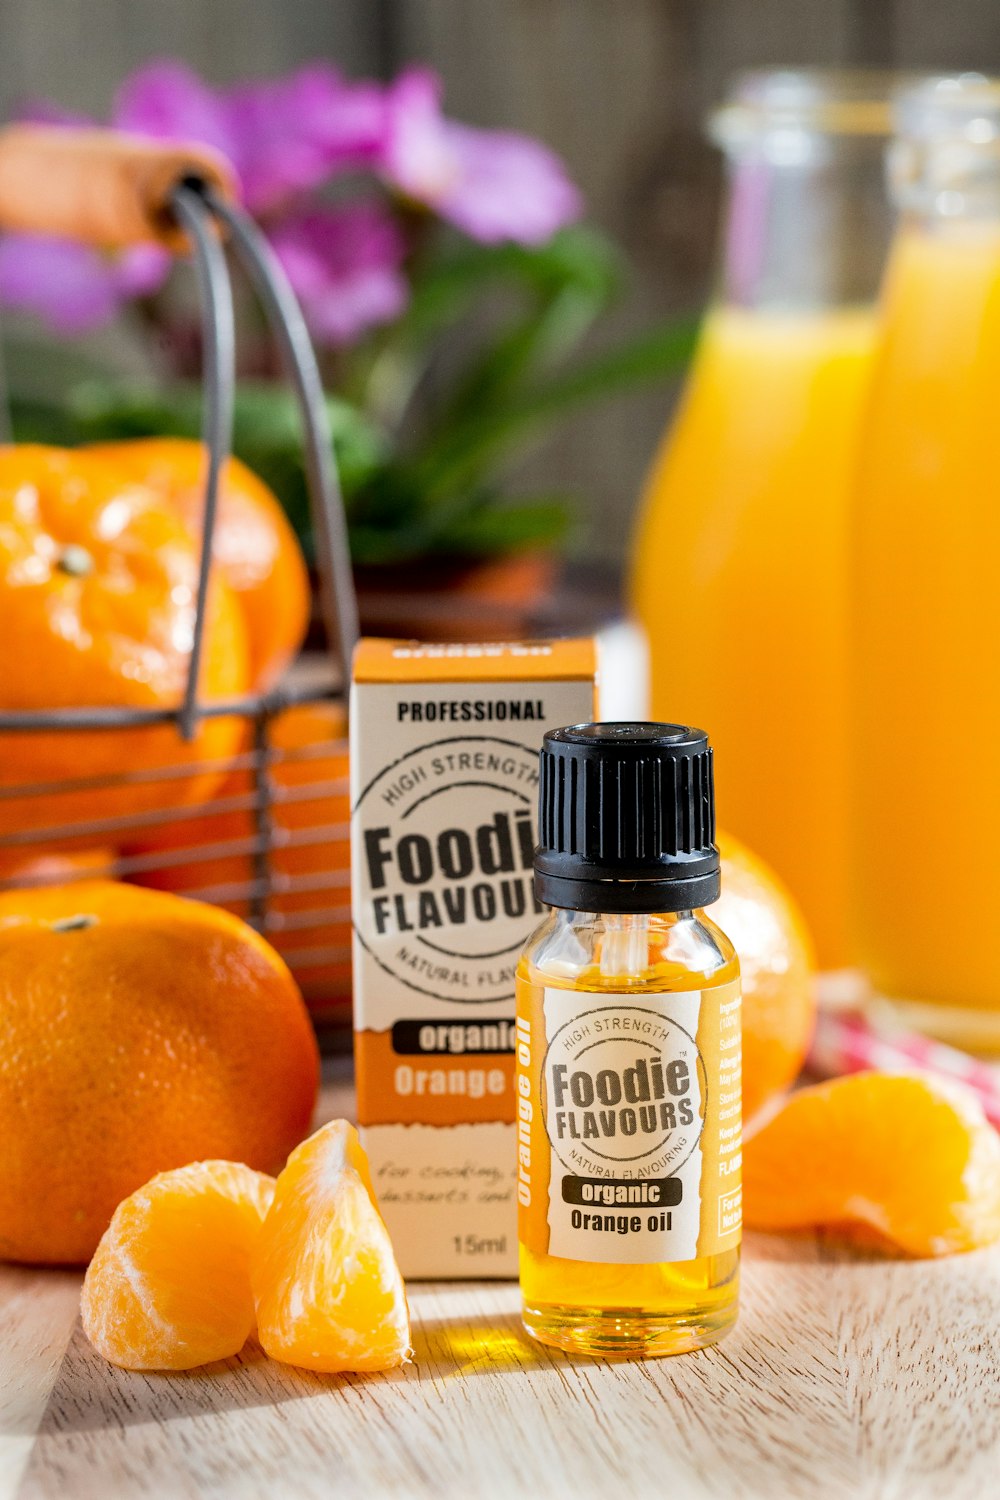 Foodi Flavour bottle with box